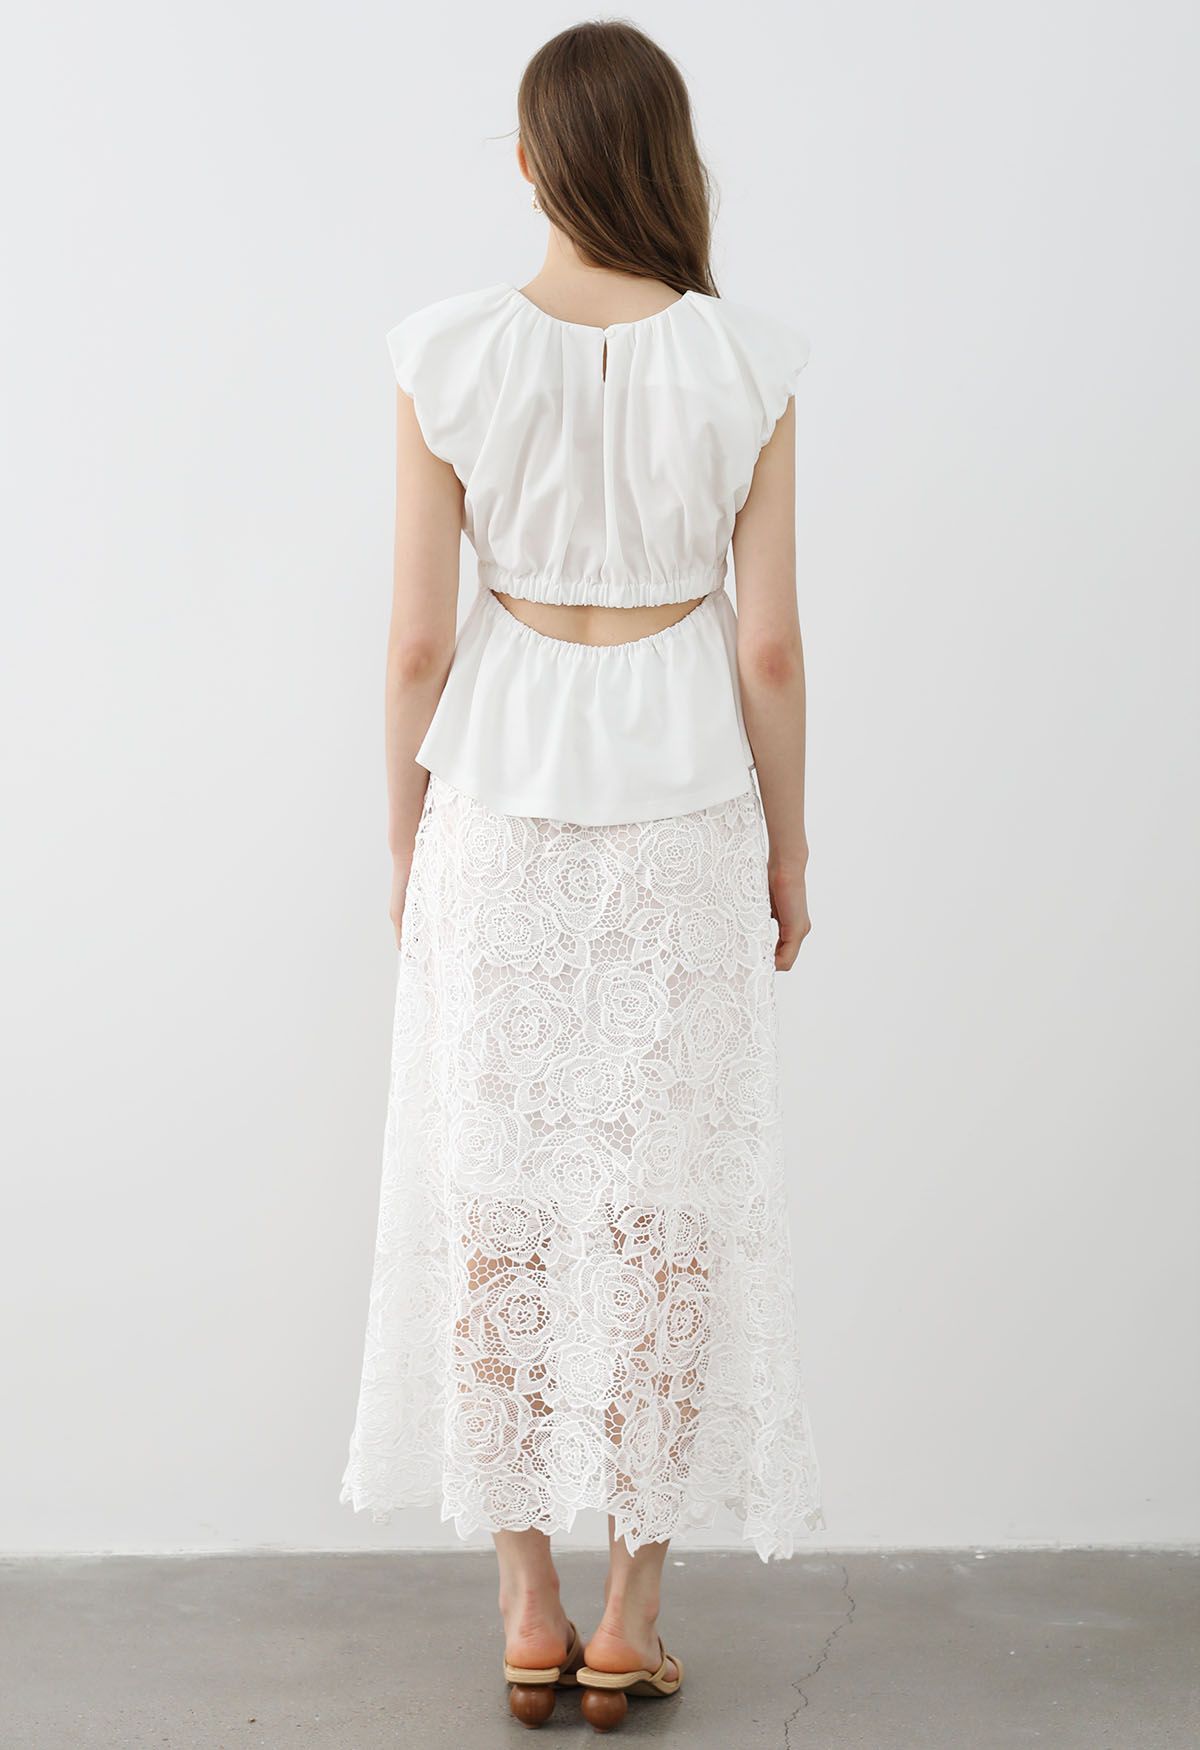 Exquisite Rose Cutwork Lace Maxi Skirt in White